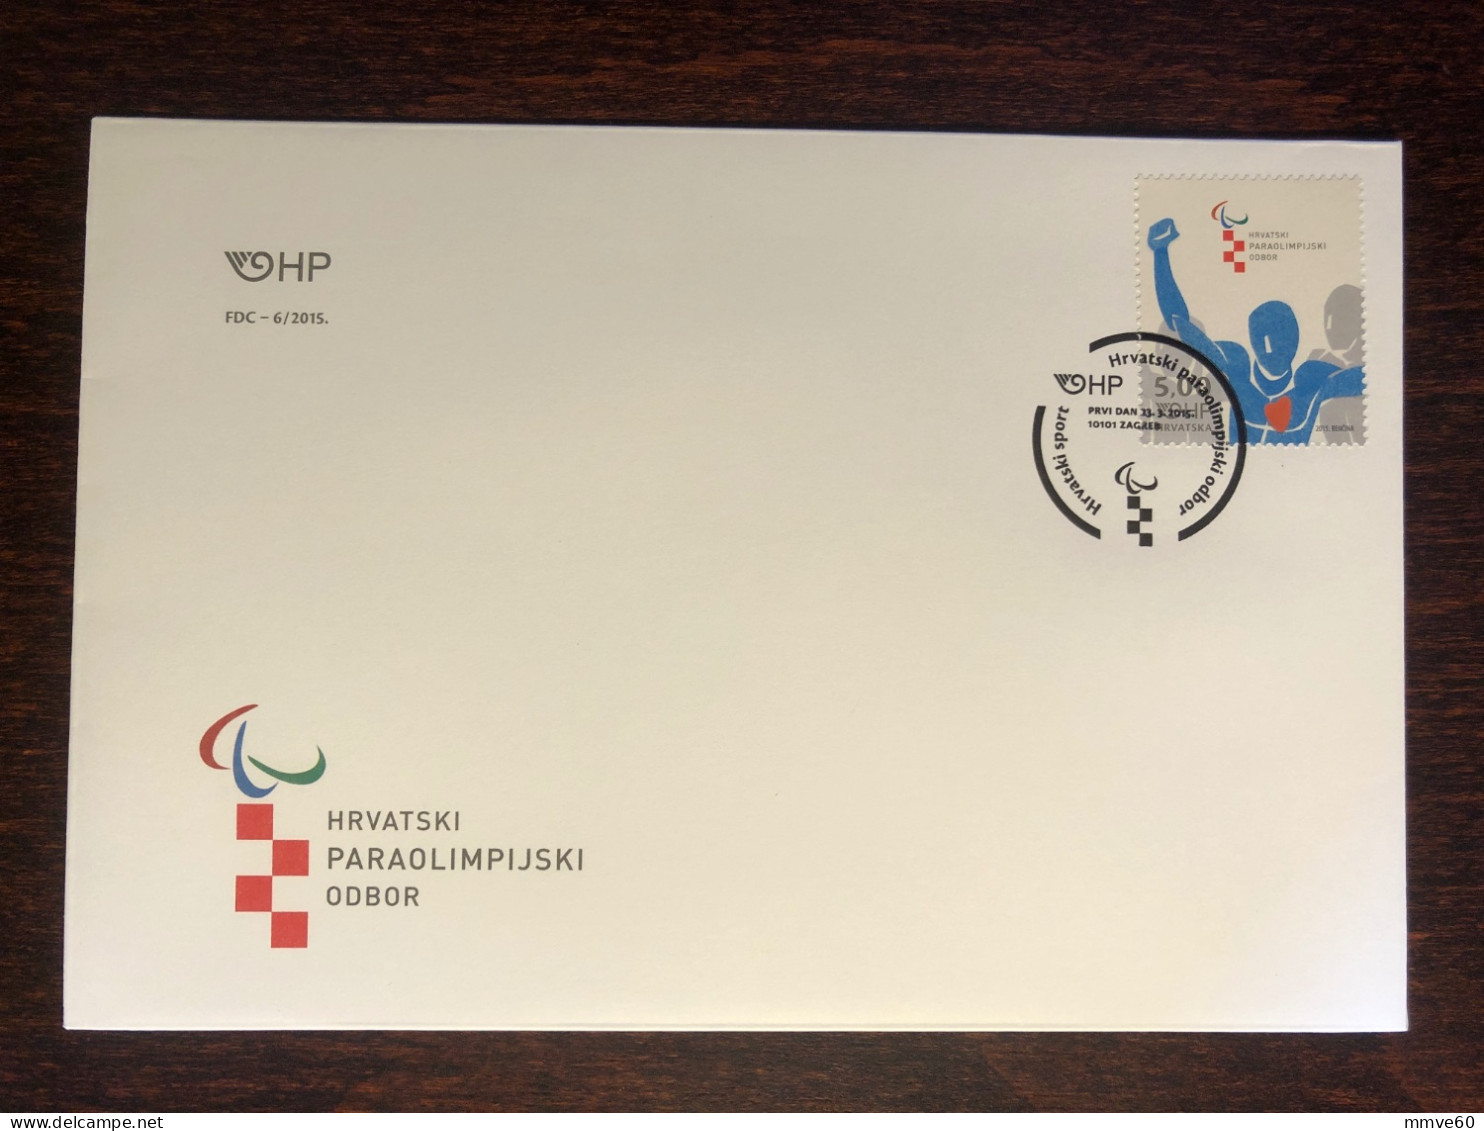 CROATIA FDC COVER 2015 YEAR PARALYMPIC DISABLED SPORTS HEALTH MEDICINE STAMPS - Croatie